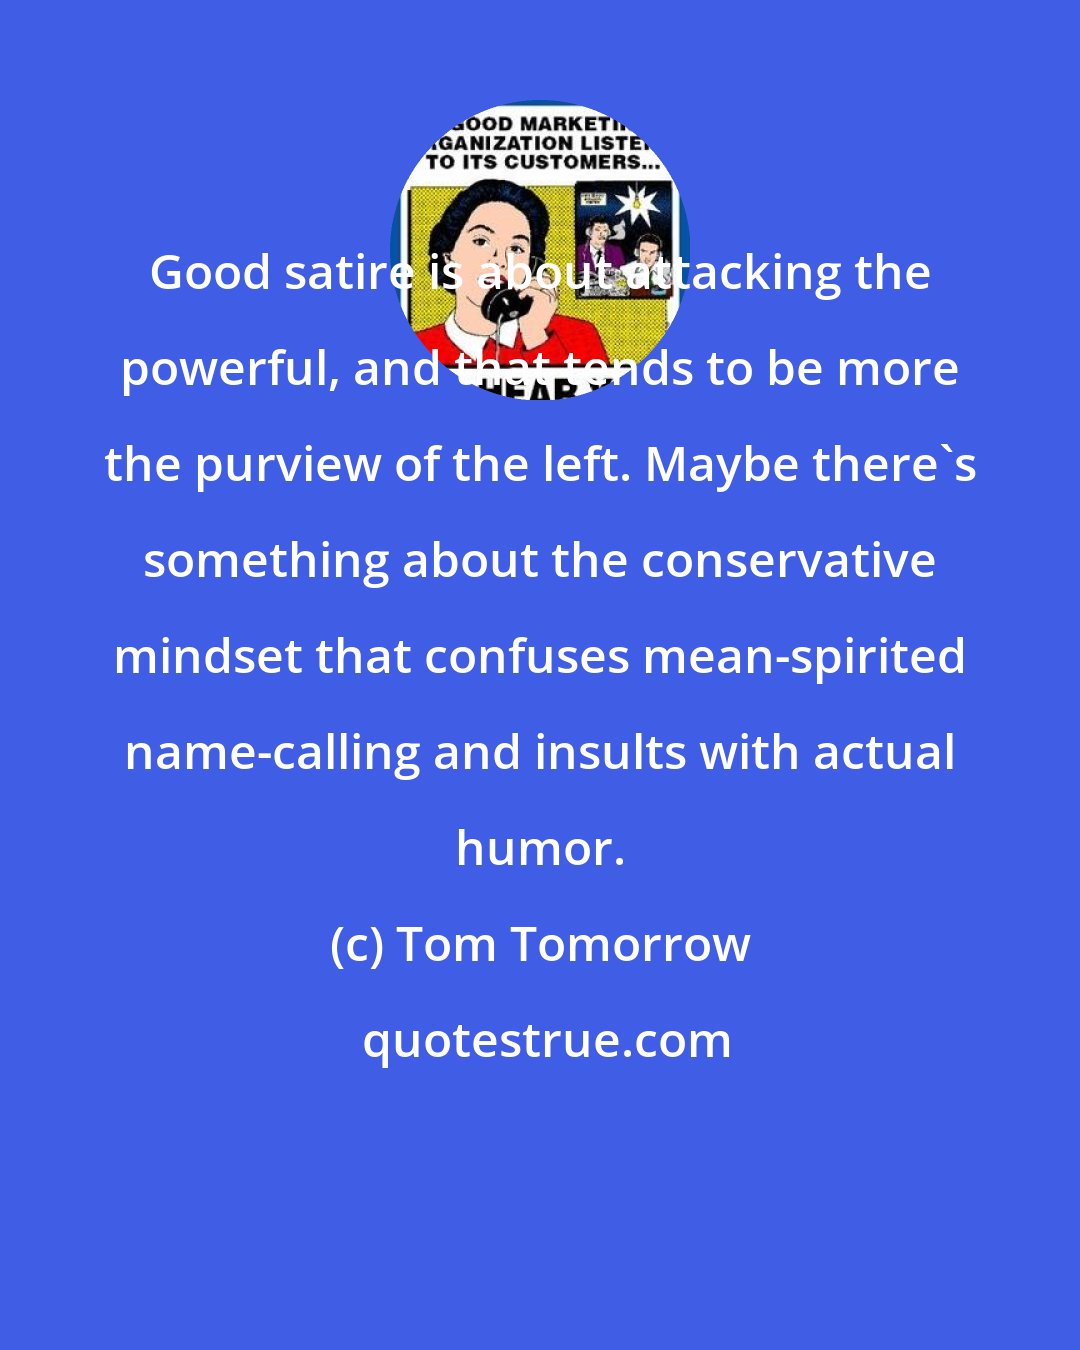 Tom Tomorrow: Good satire is about attacking the powerful, and that tends to be more the purview of the left. Maybe there's something about the conservative mindset that confuses mean-spirited name-calling and insults with actual humor.